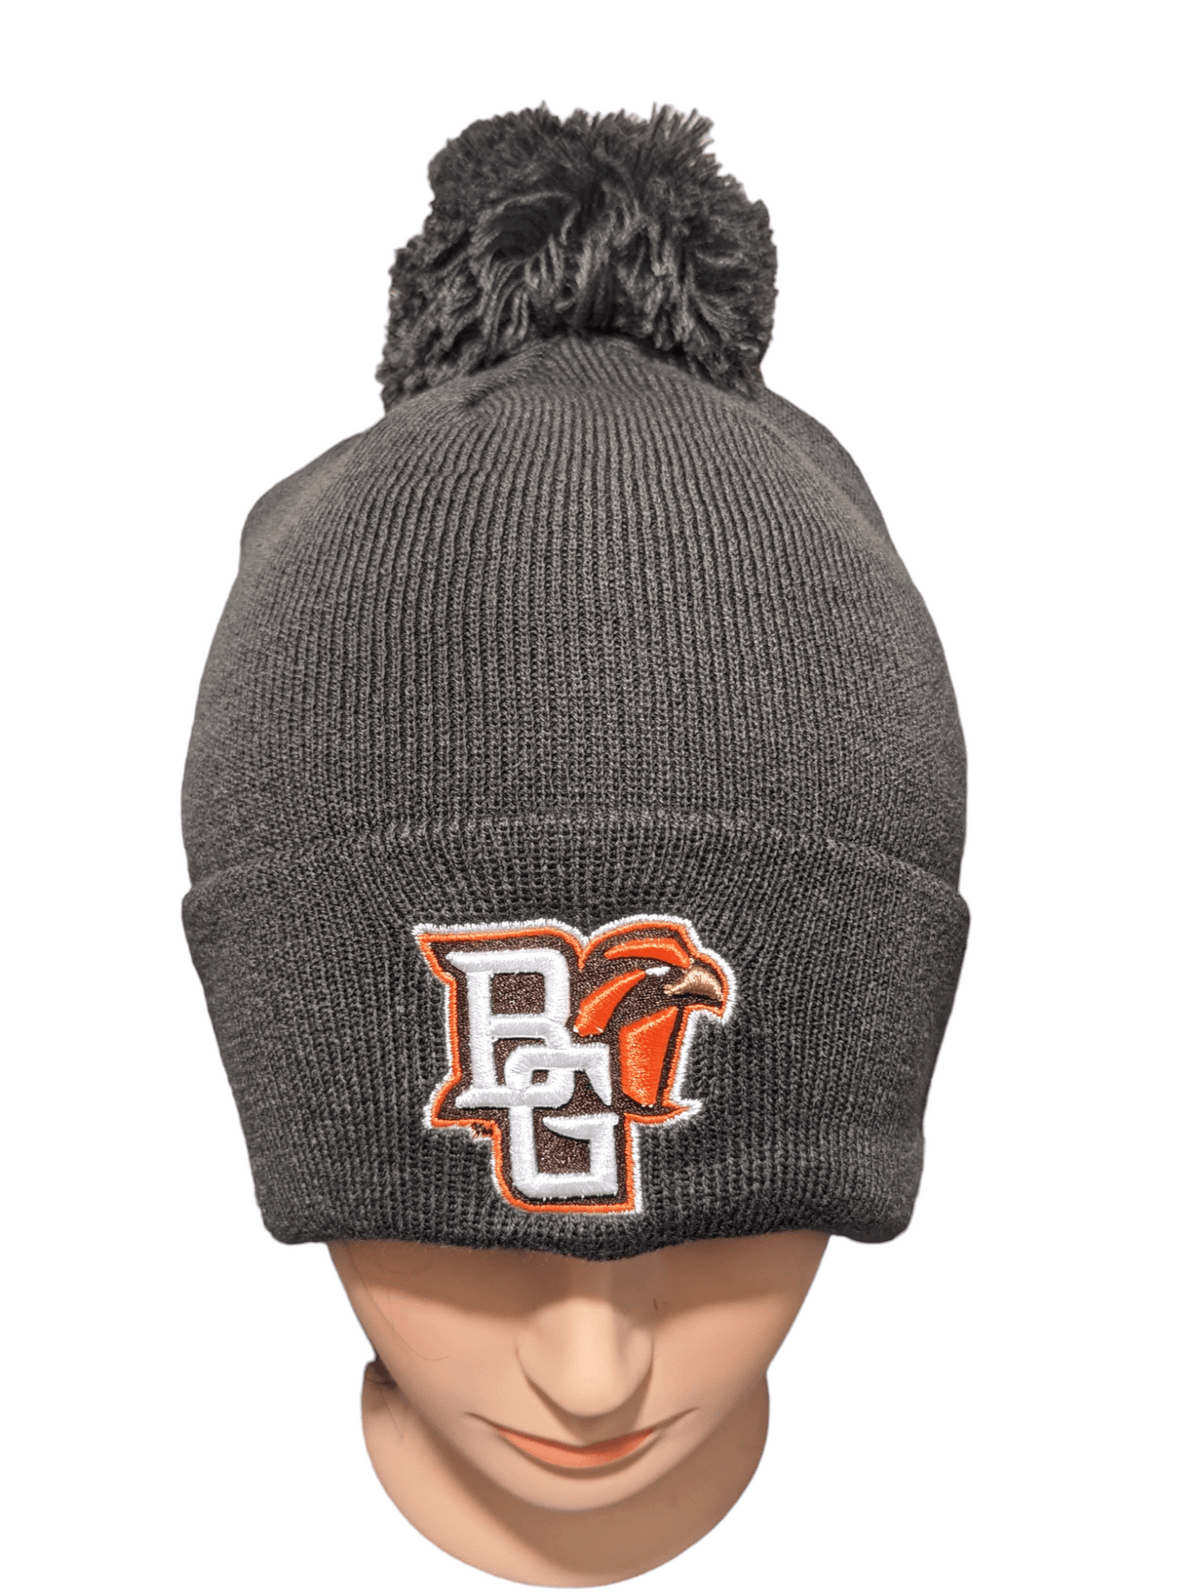 Zephyr Hat Bowling Green Falcon Knit Winter Hat with Pom